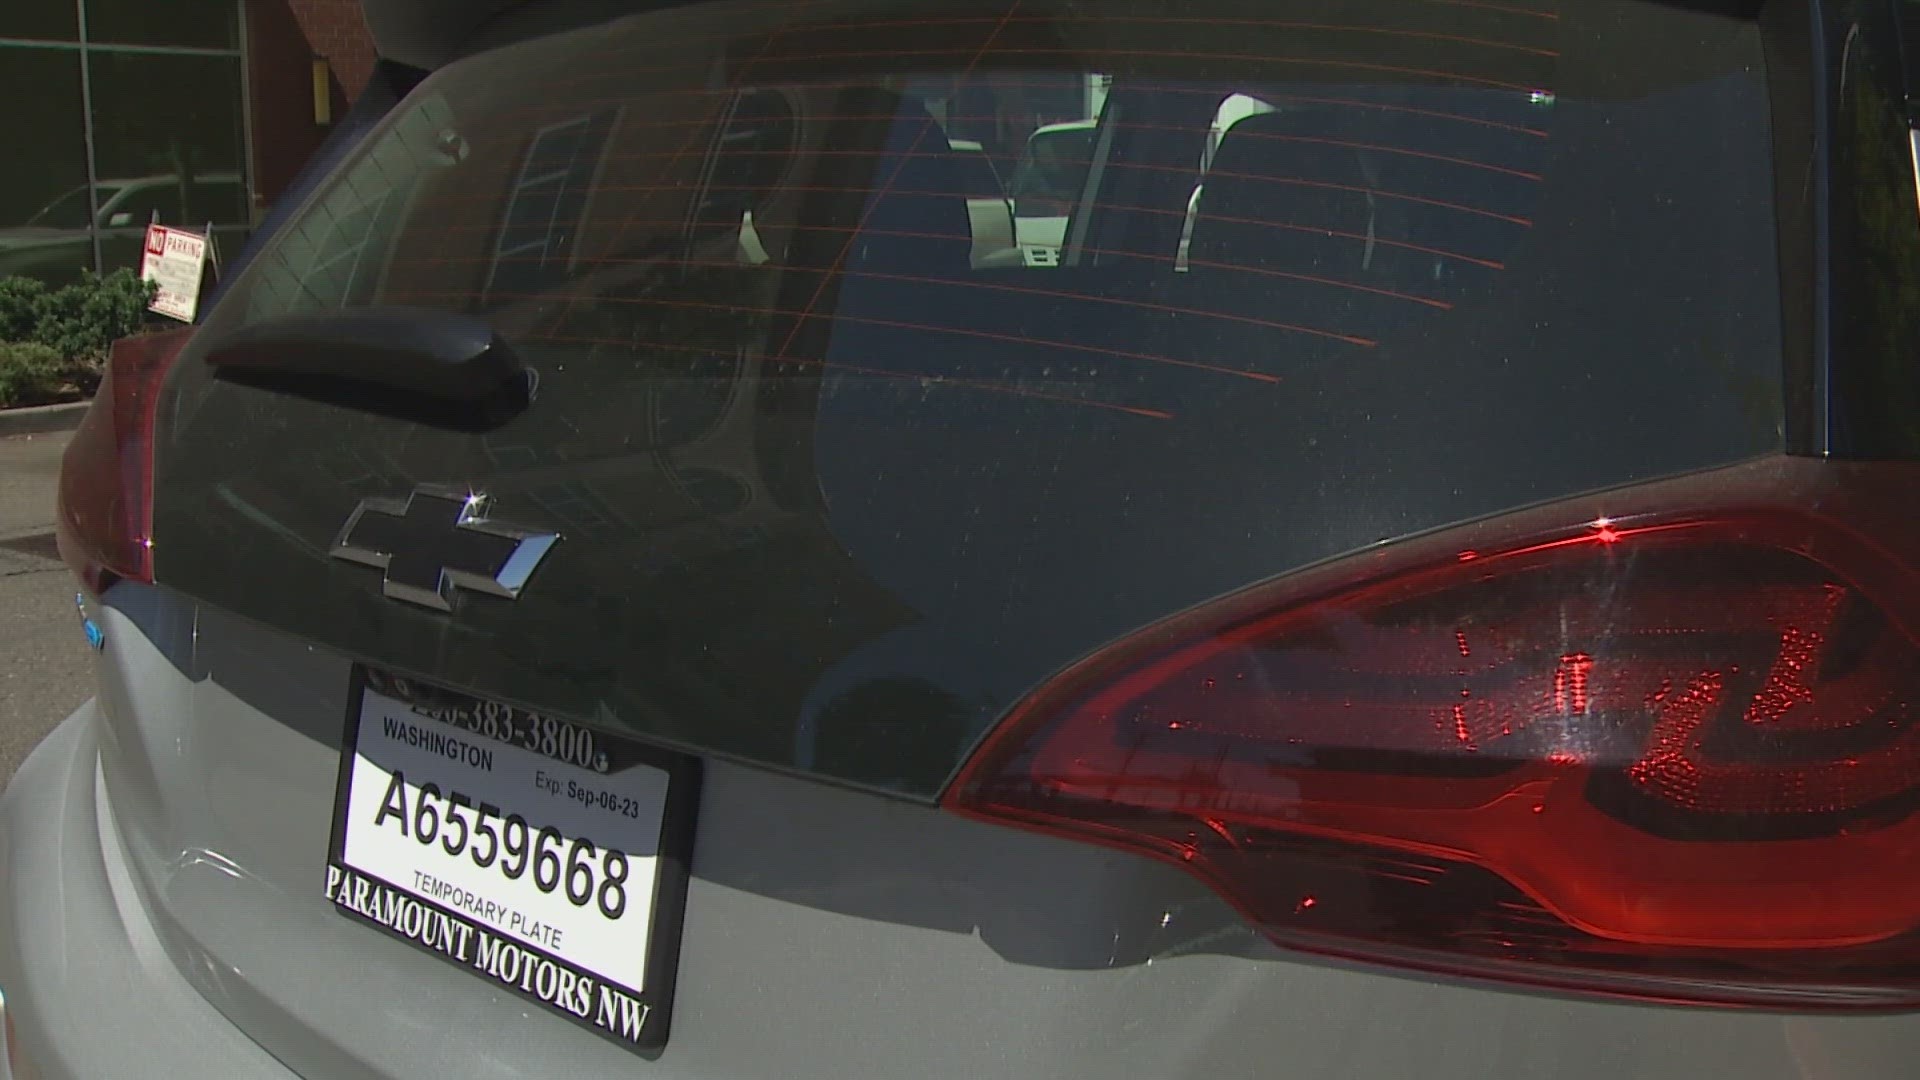 Bought a brand-new car? The Department of Licensing is going to start replacing temporary paper license plates with durable plates for the outside of your new car.